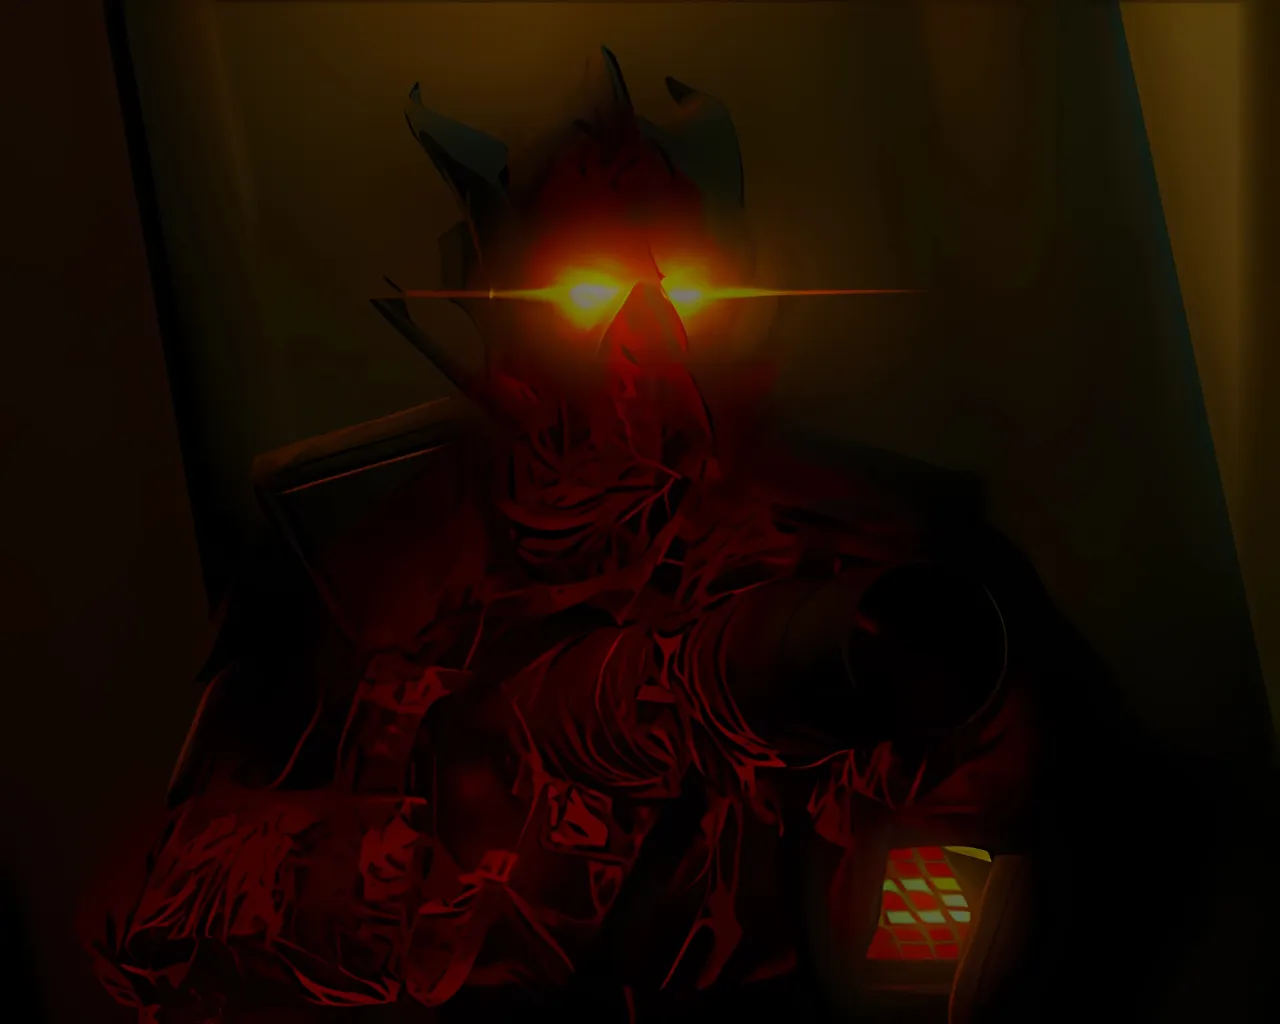 a trooper in a dark room with a red aura stands guard as purple light flashes in front of him